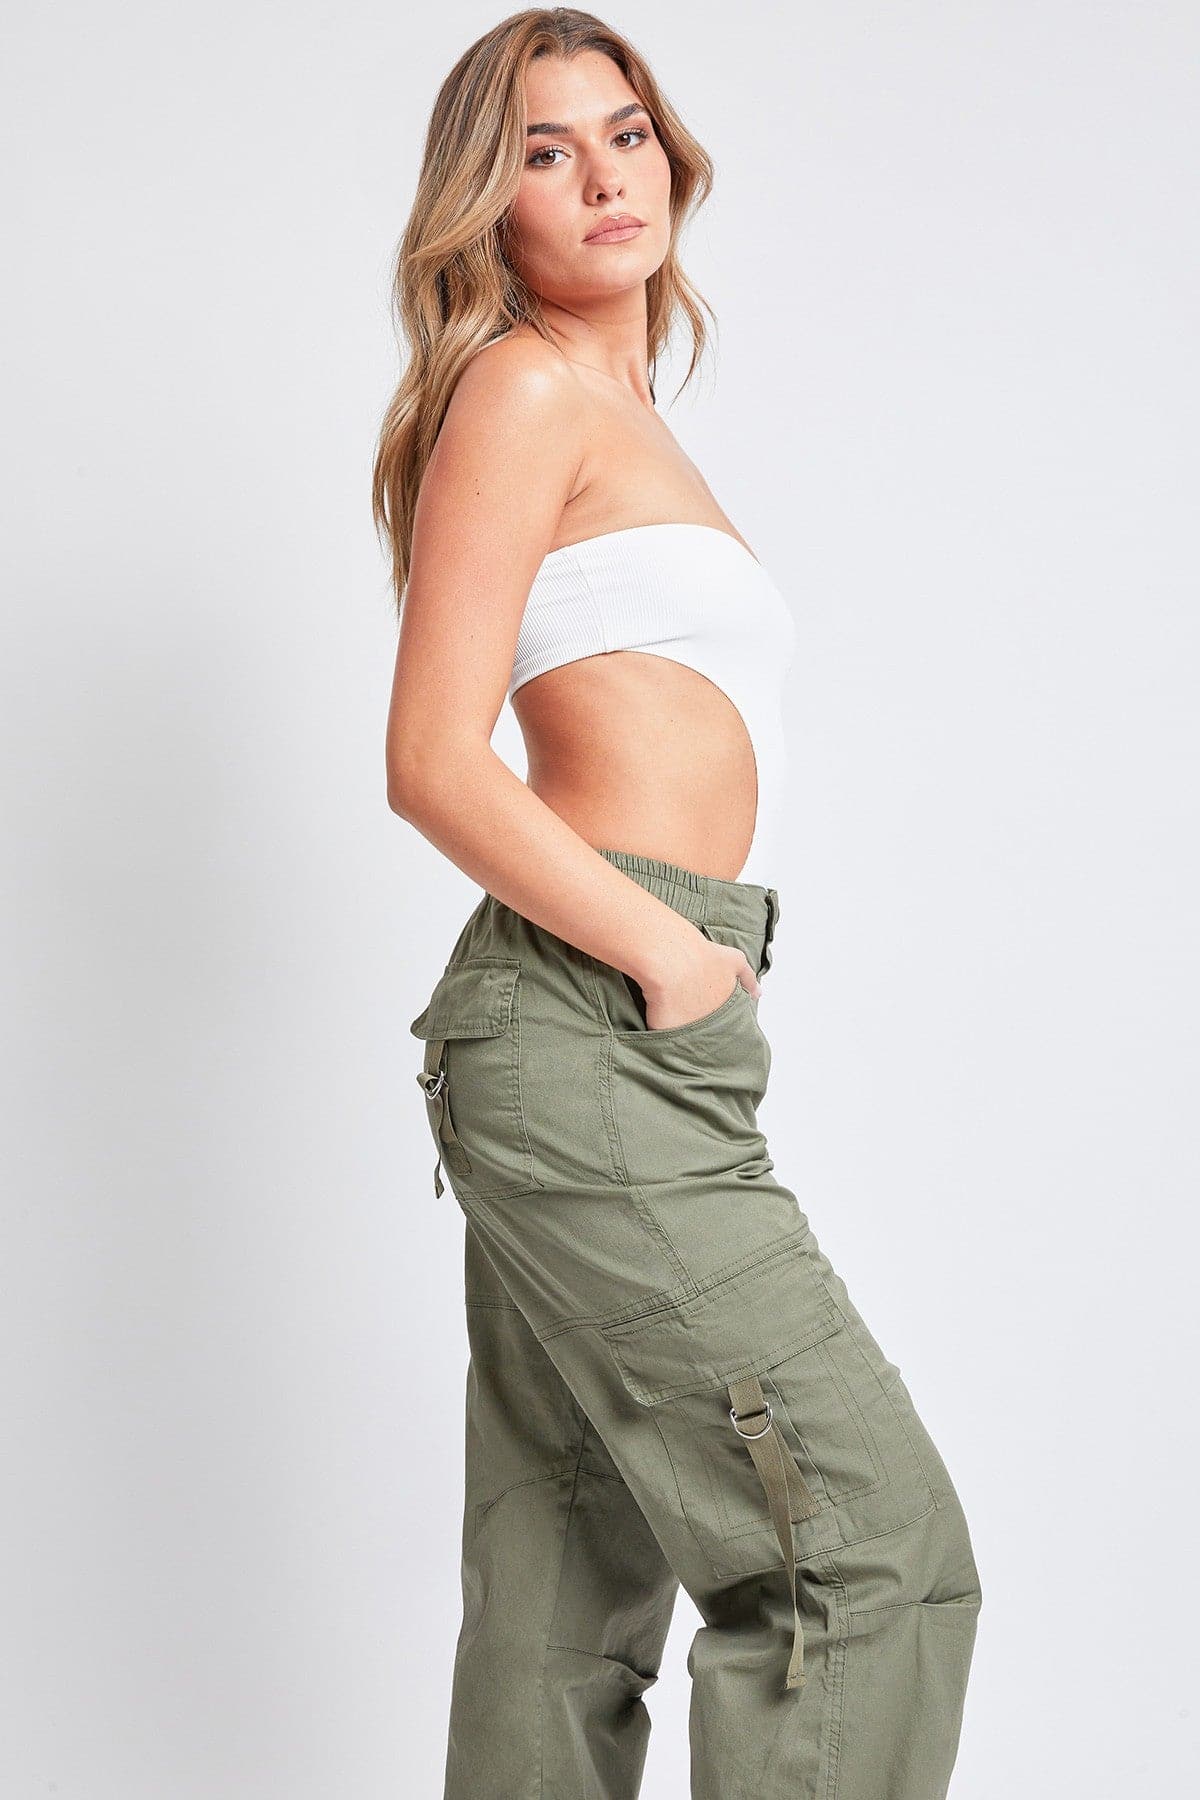 Women’s Relaxed Fit Ring Cargo Pants